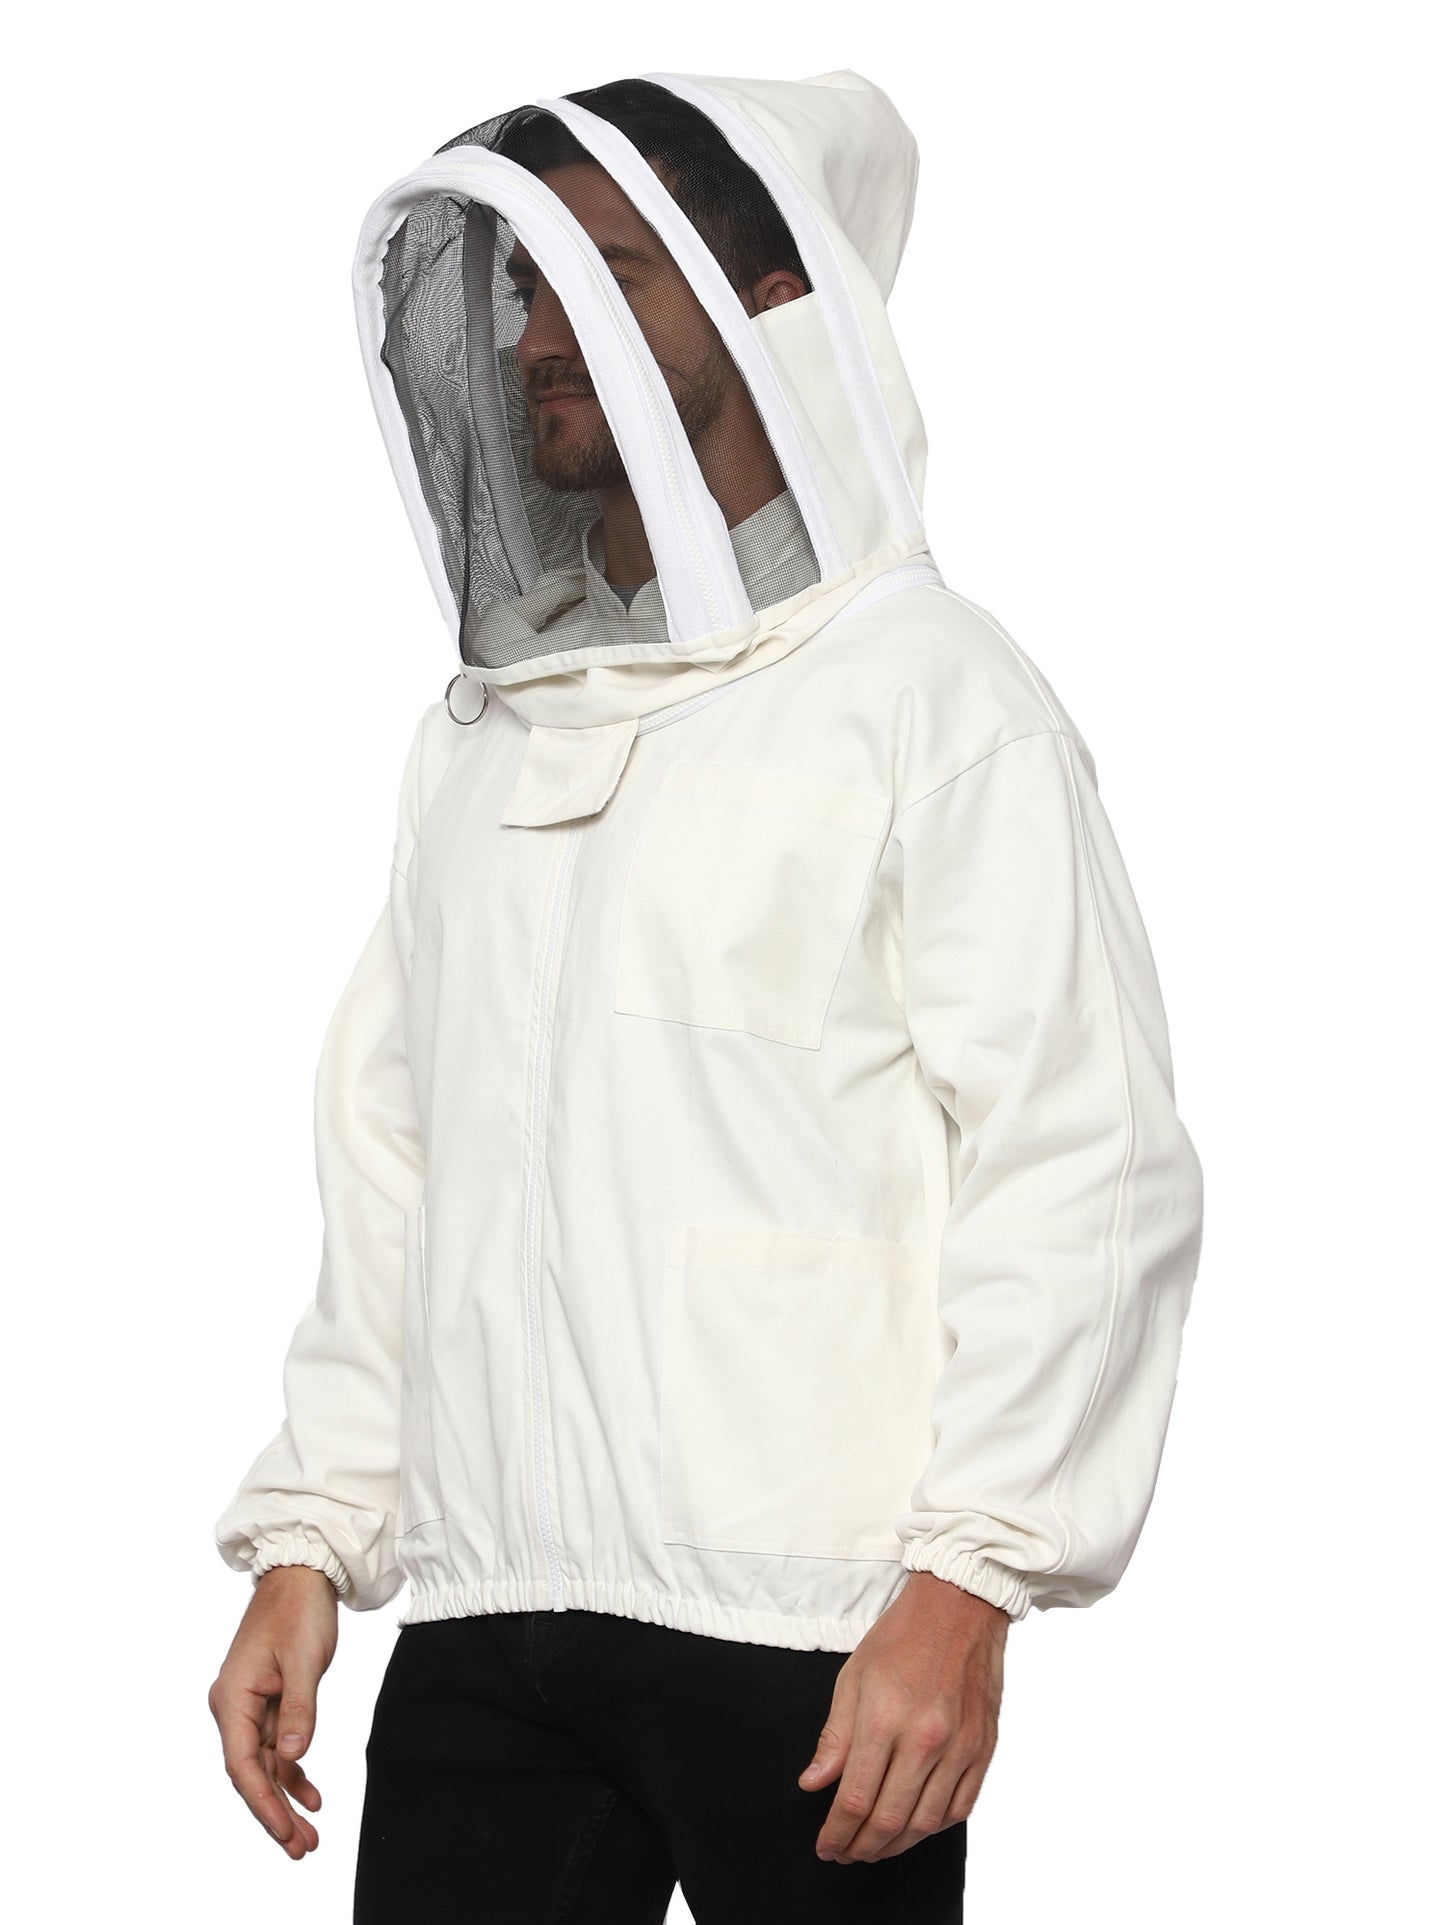 BEEATTIRE Bee Jacket with Easy Access Veil – 100% Cotton – Stingless protection Beekeeper Jacket